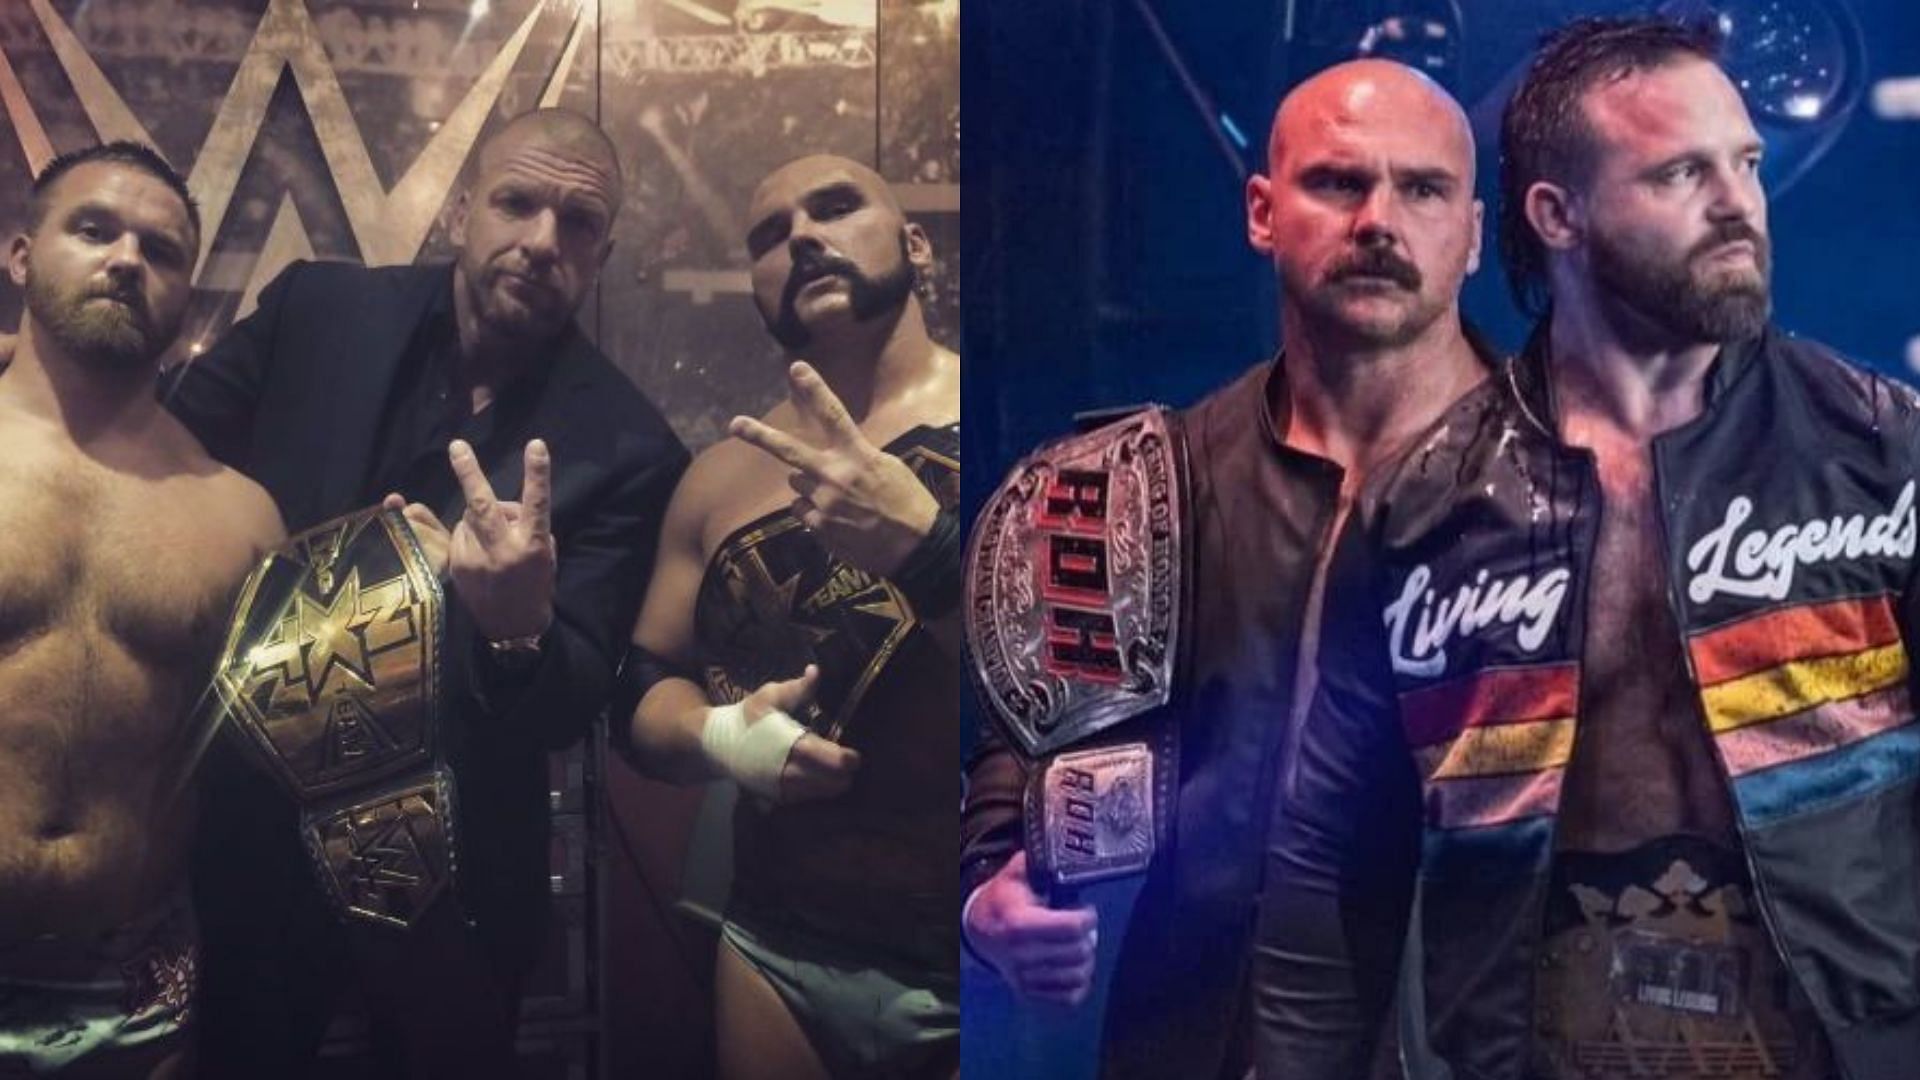 FTR are former AEW World Tag Team Champions